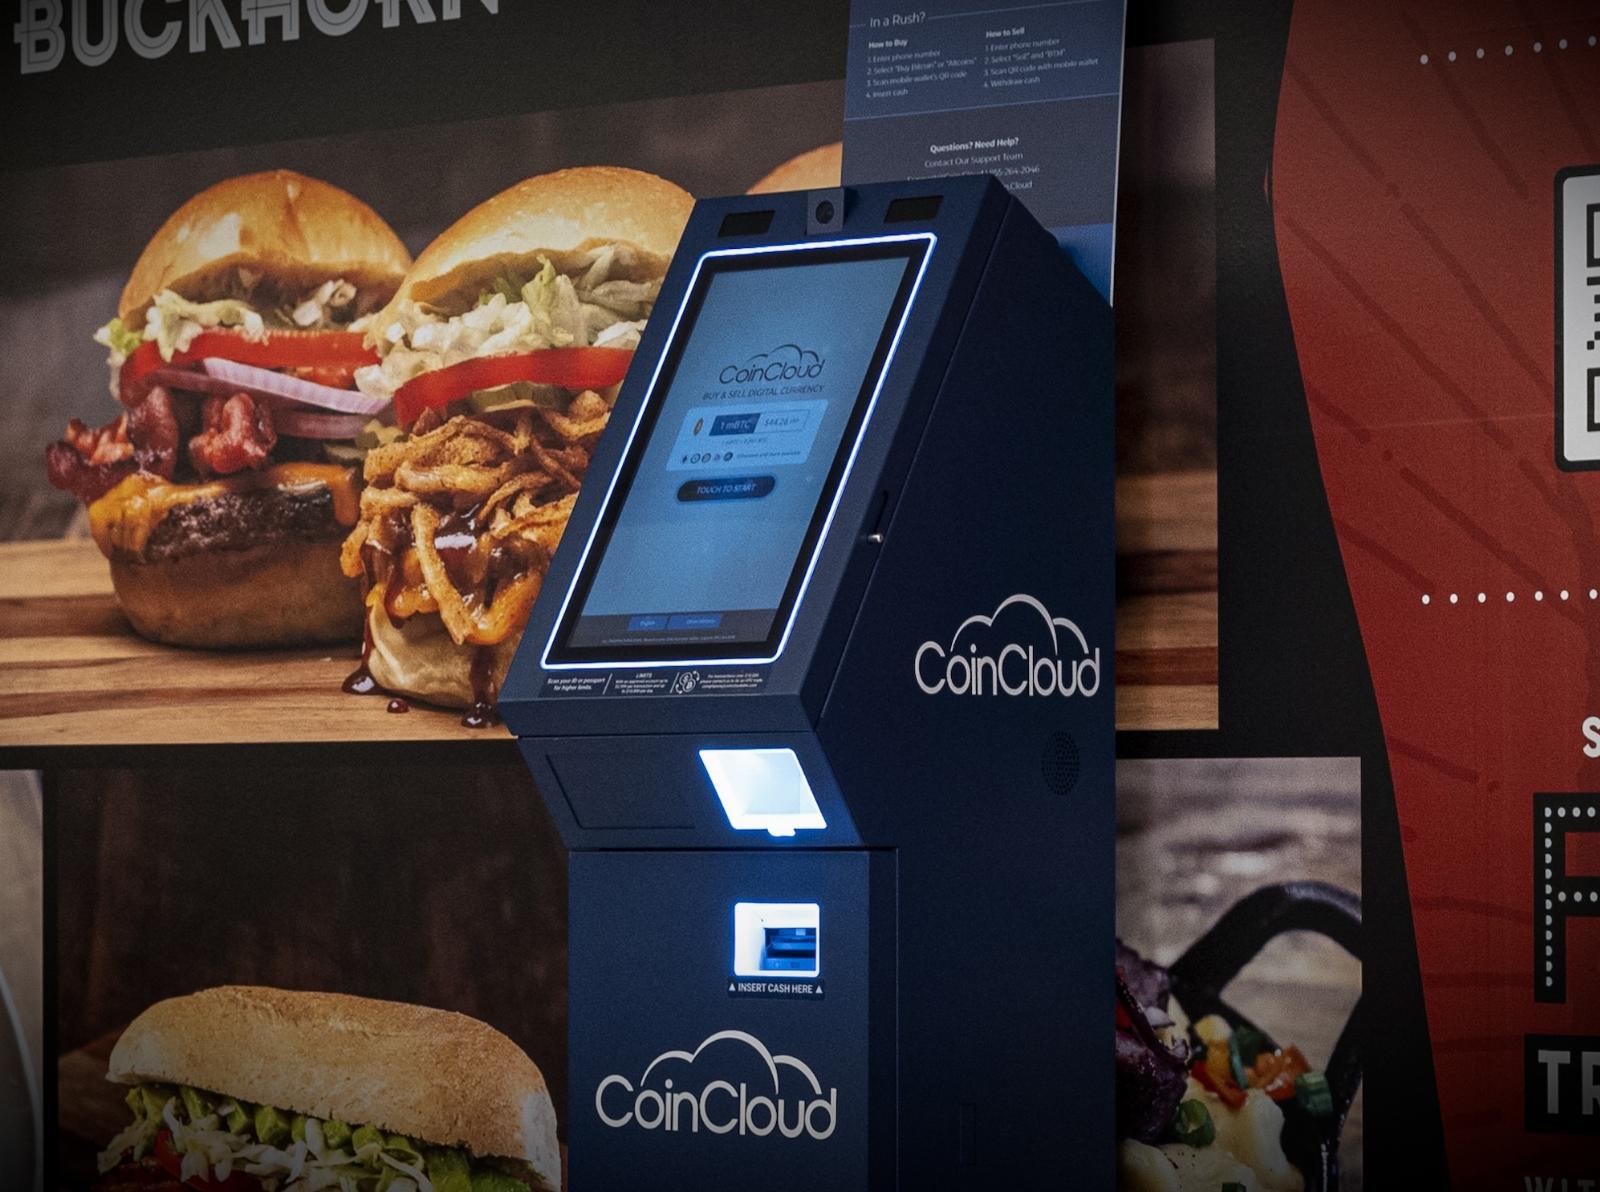 Bitcoin ATM company Coin Cloud got hacked. Even its new owners don’t know how